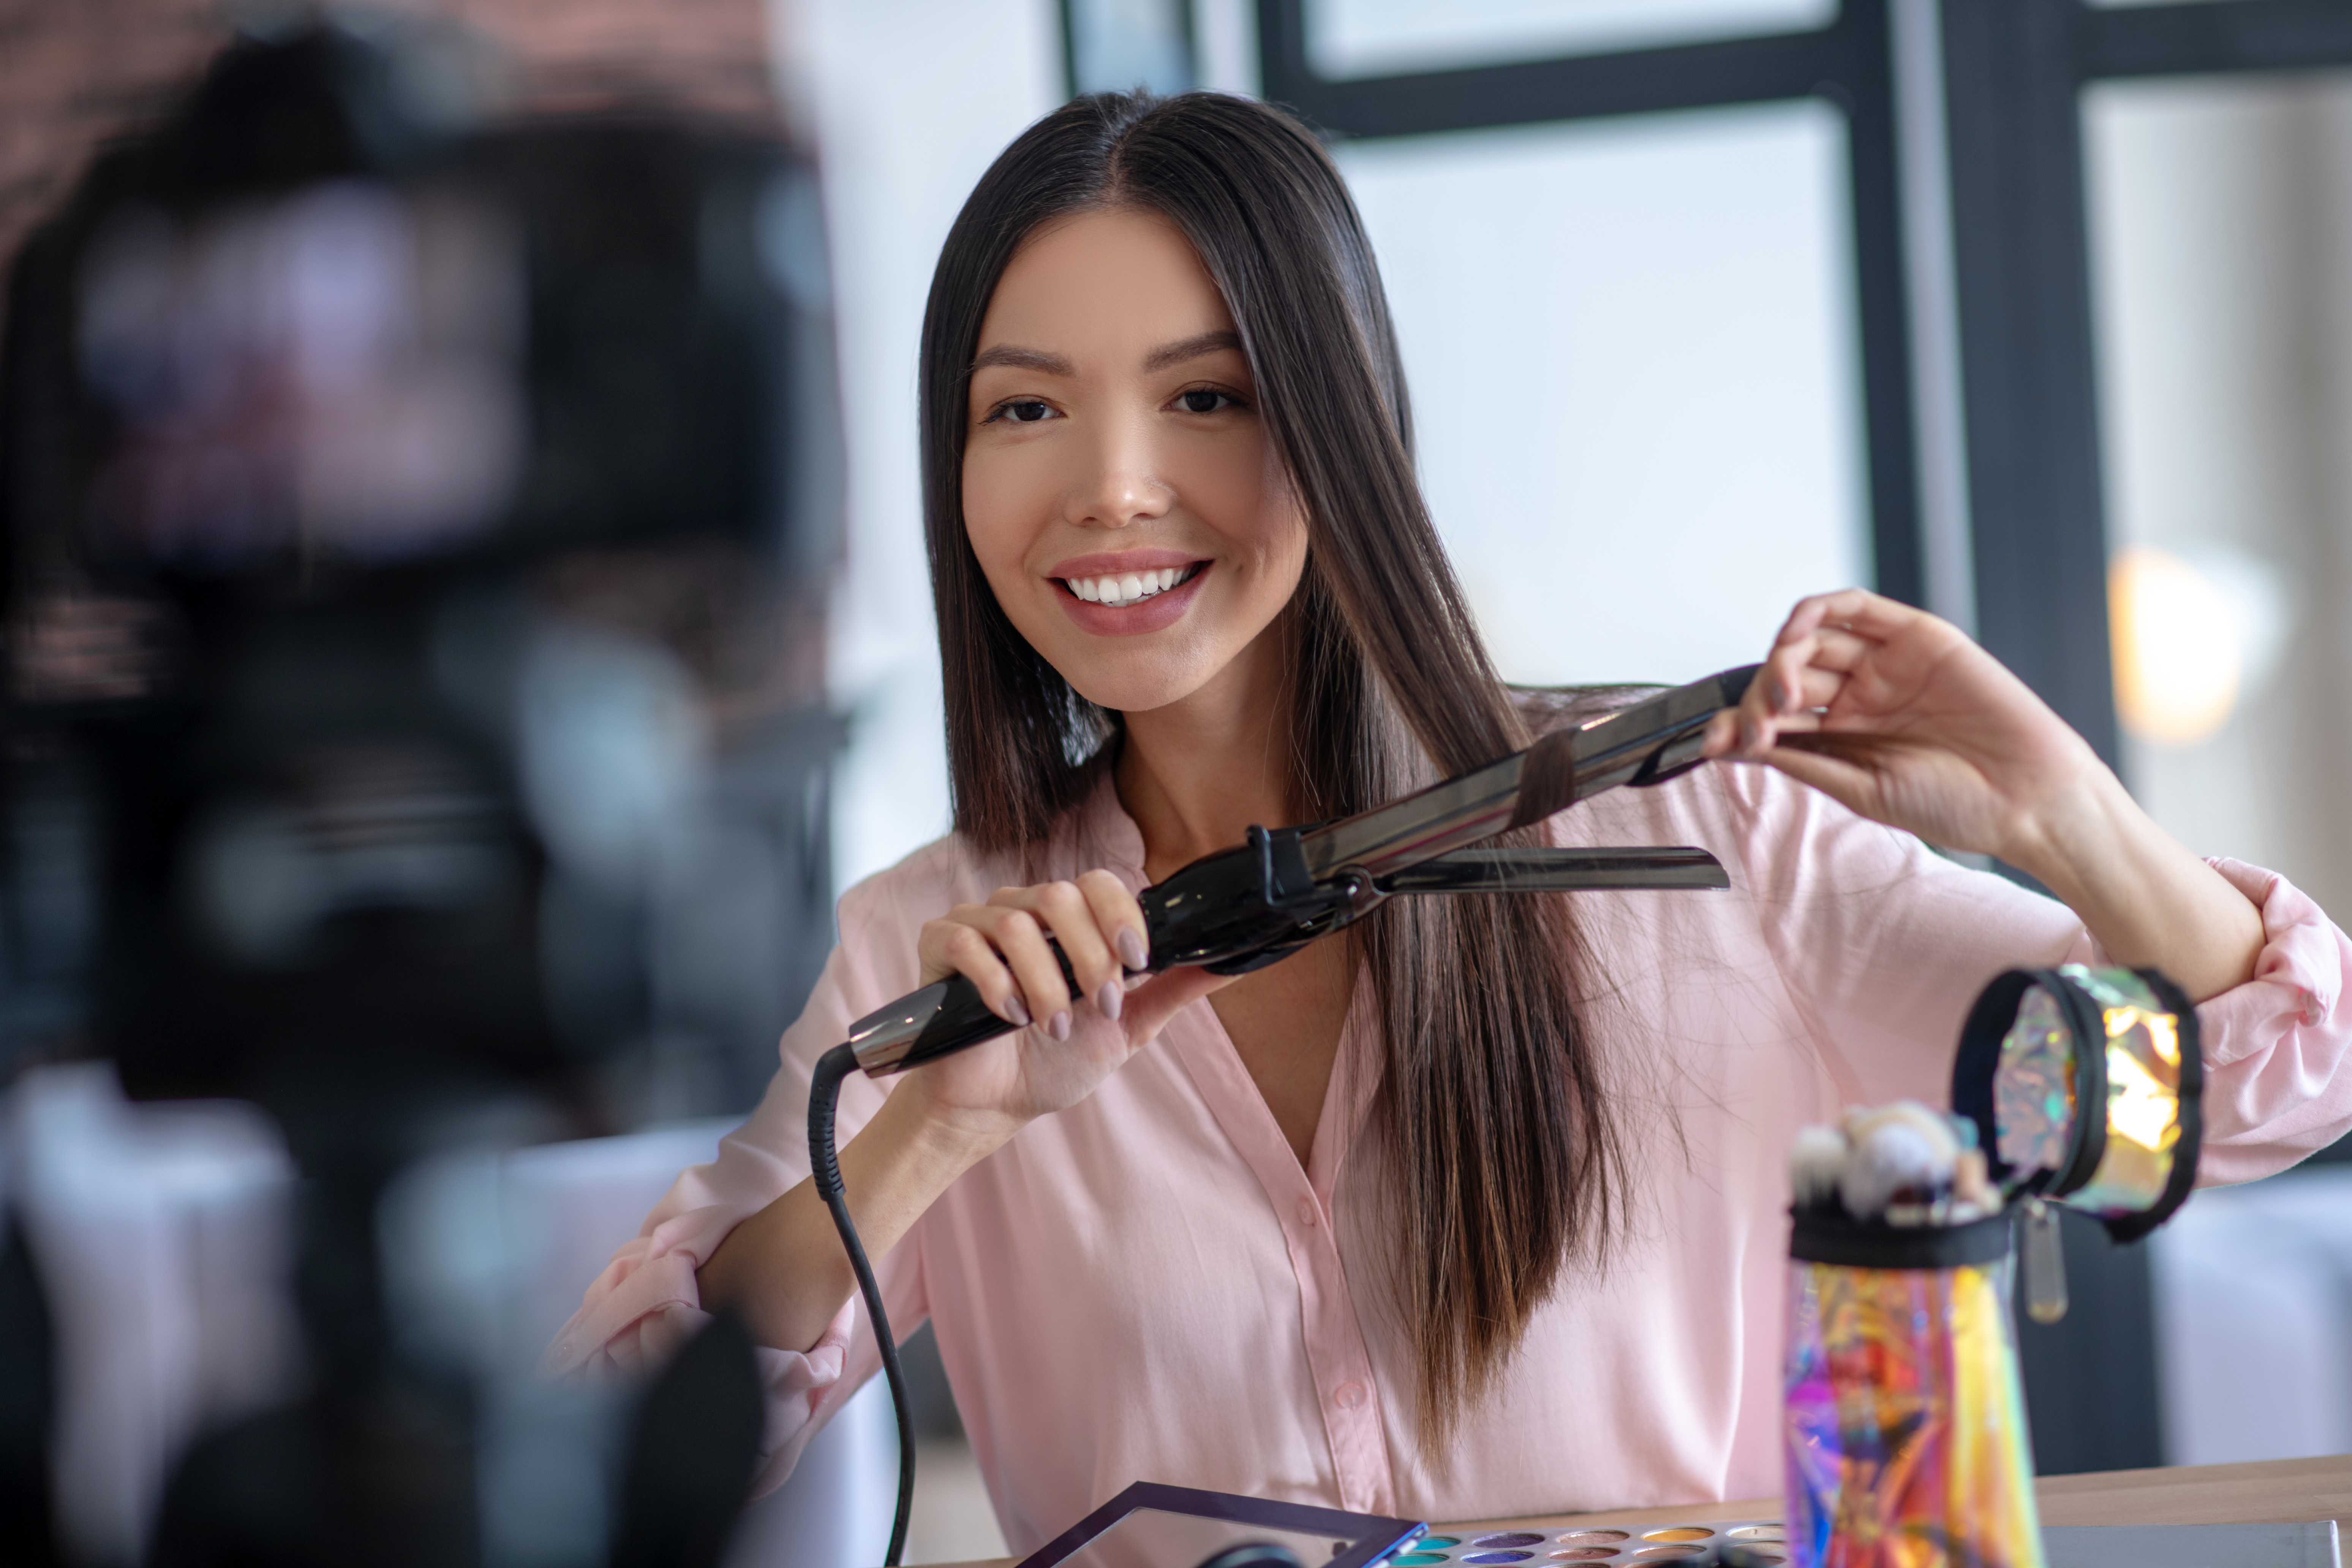 Woman smiling and using a hair styling tool